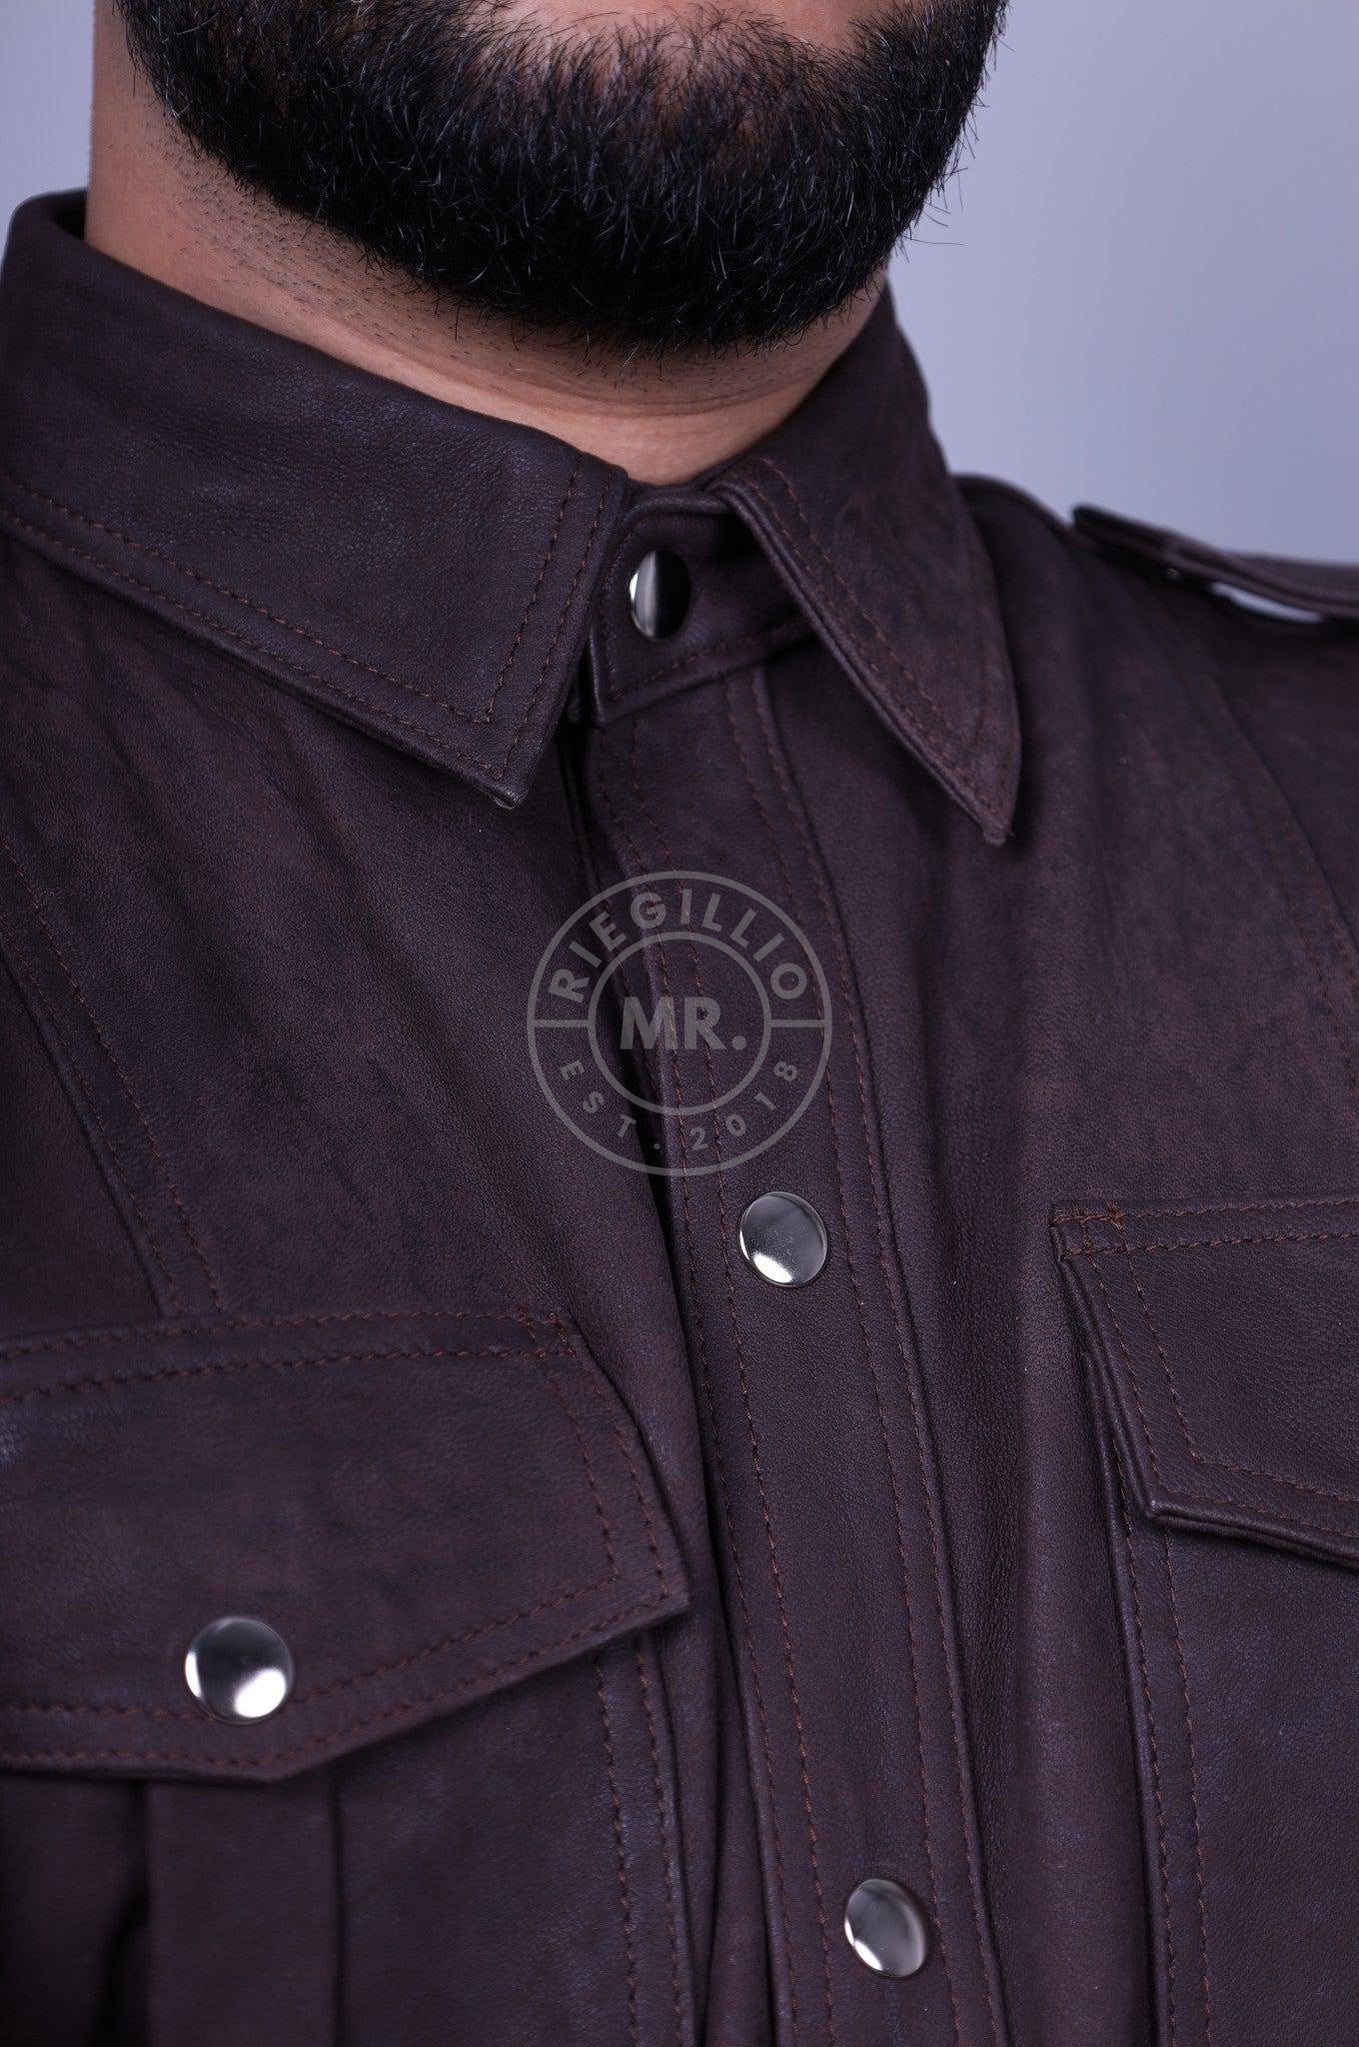 Washed Brown Leather Shirt at MR. Riegillio